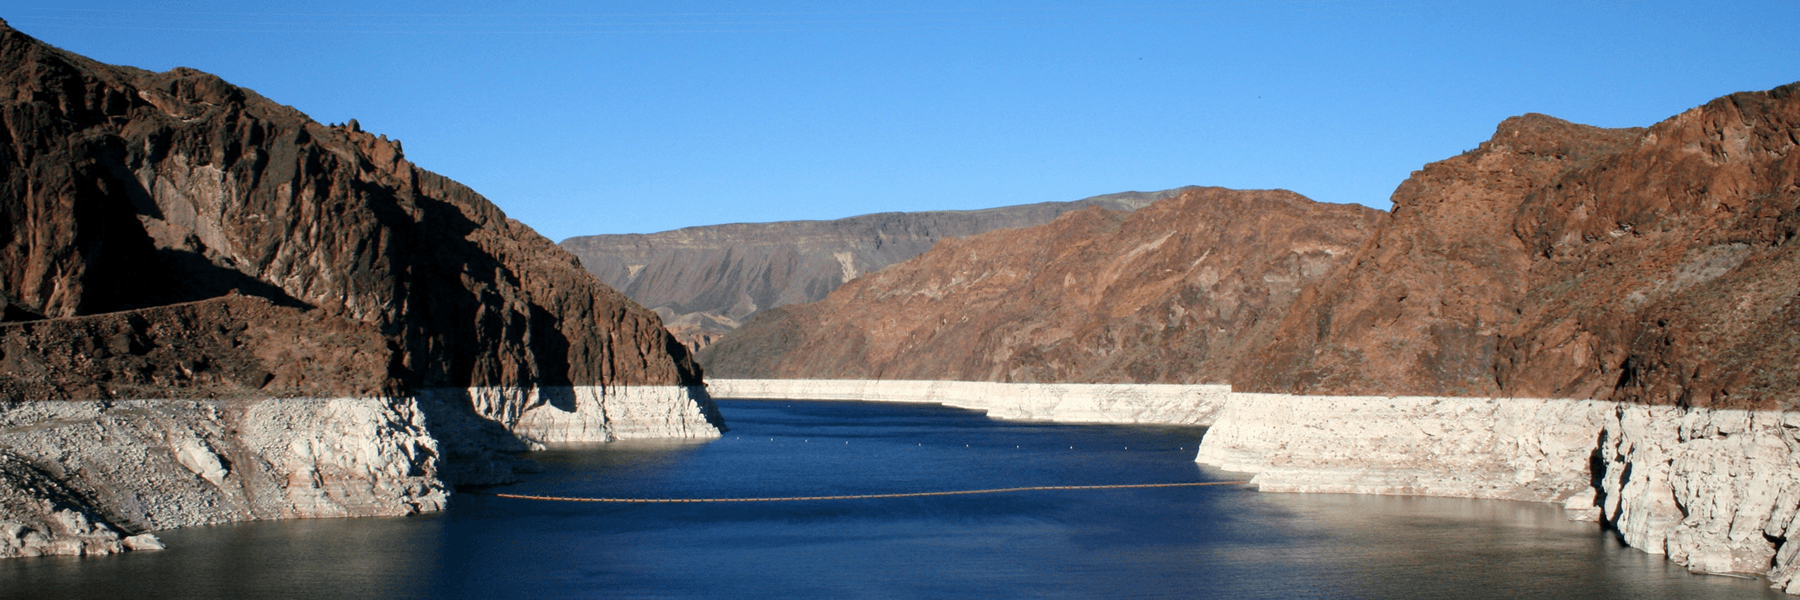 Declining water levels at Lake Mead. Photo credit: Alicia Burtner, USGS